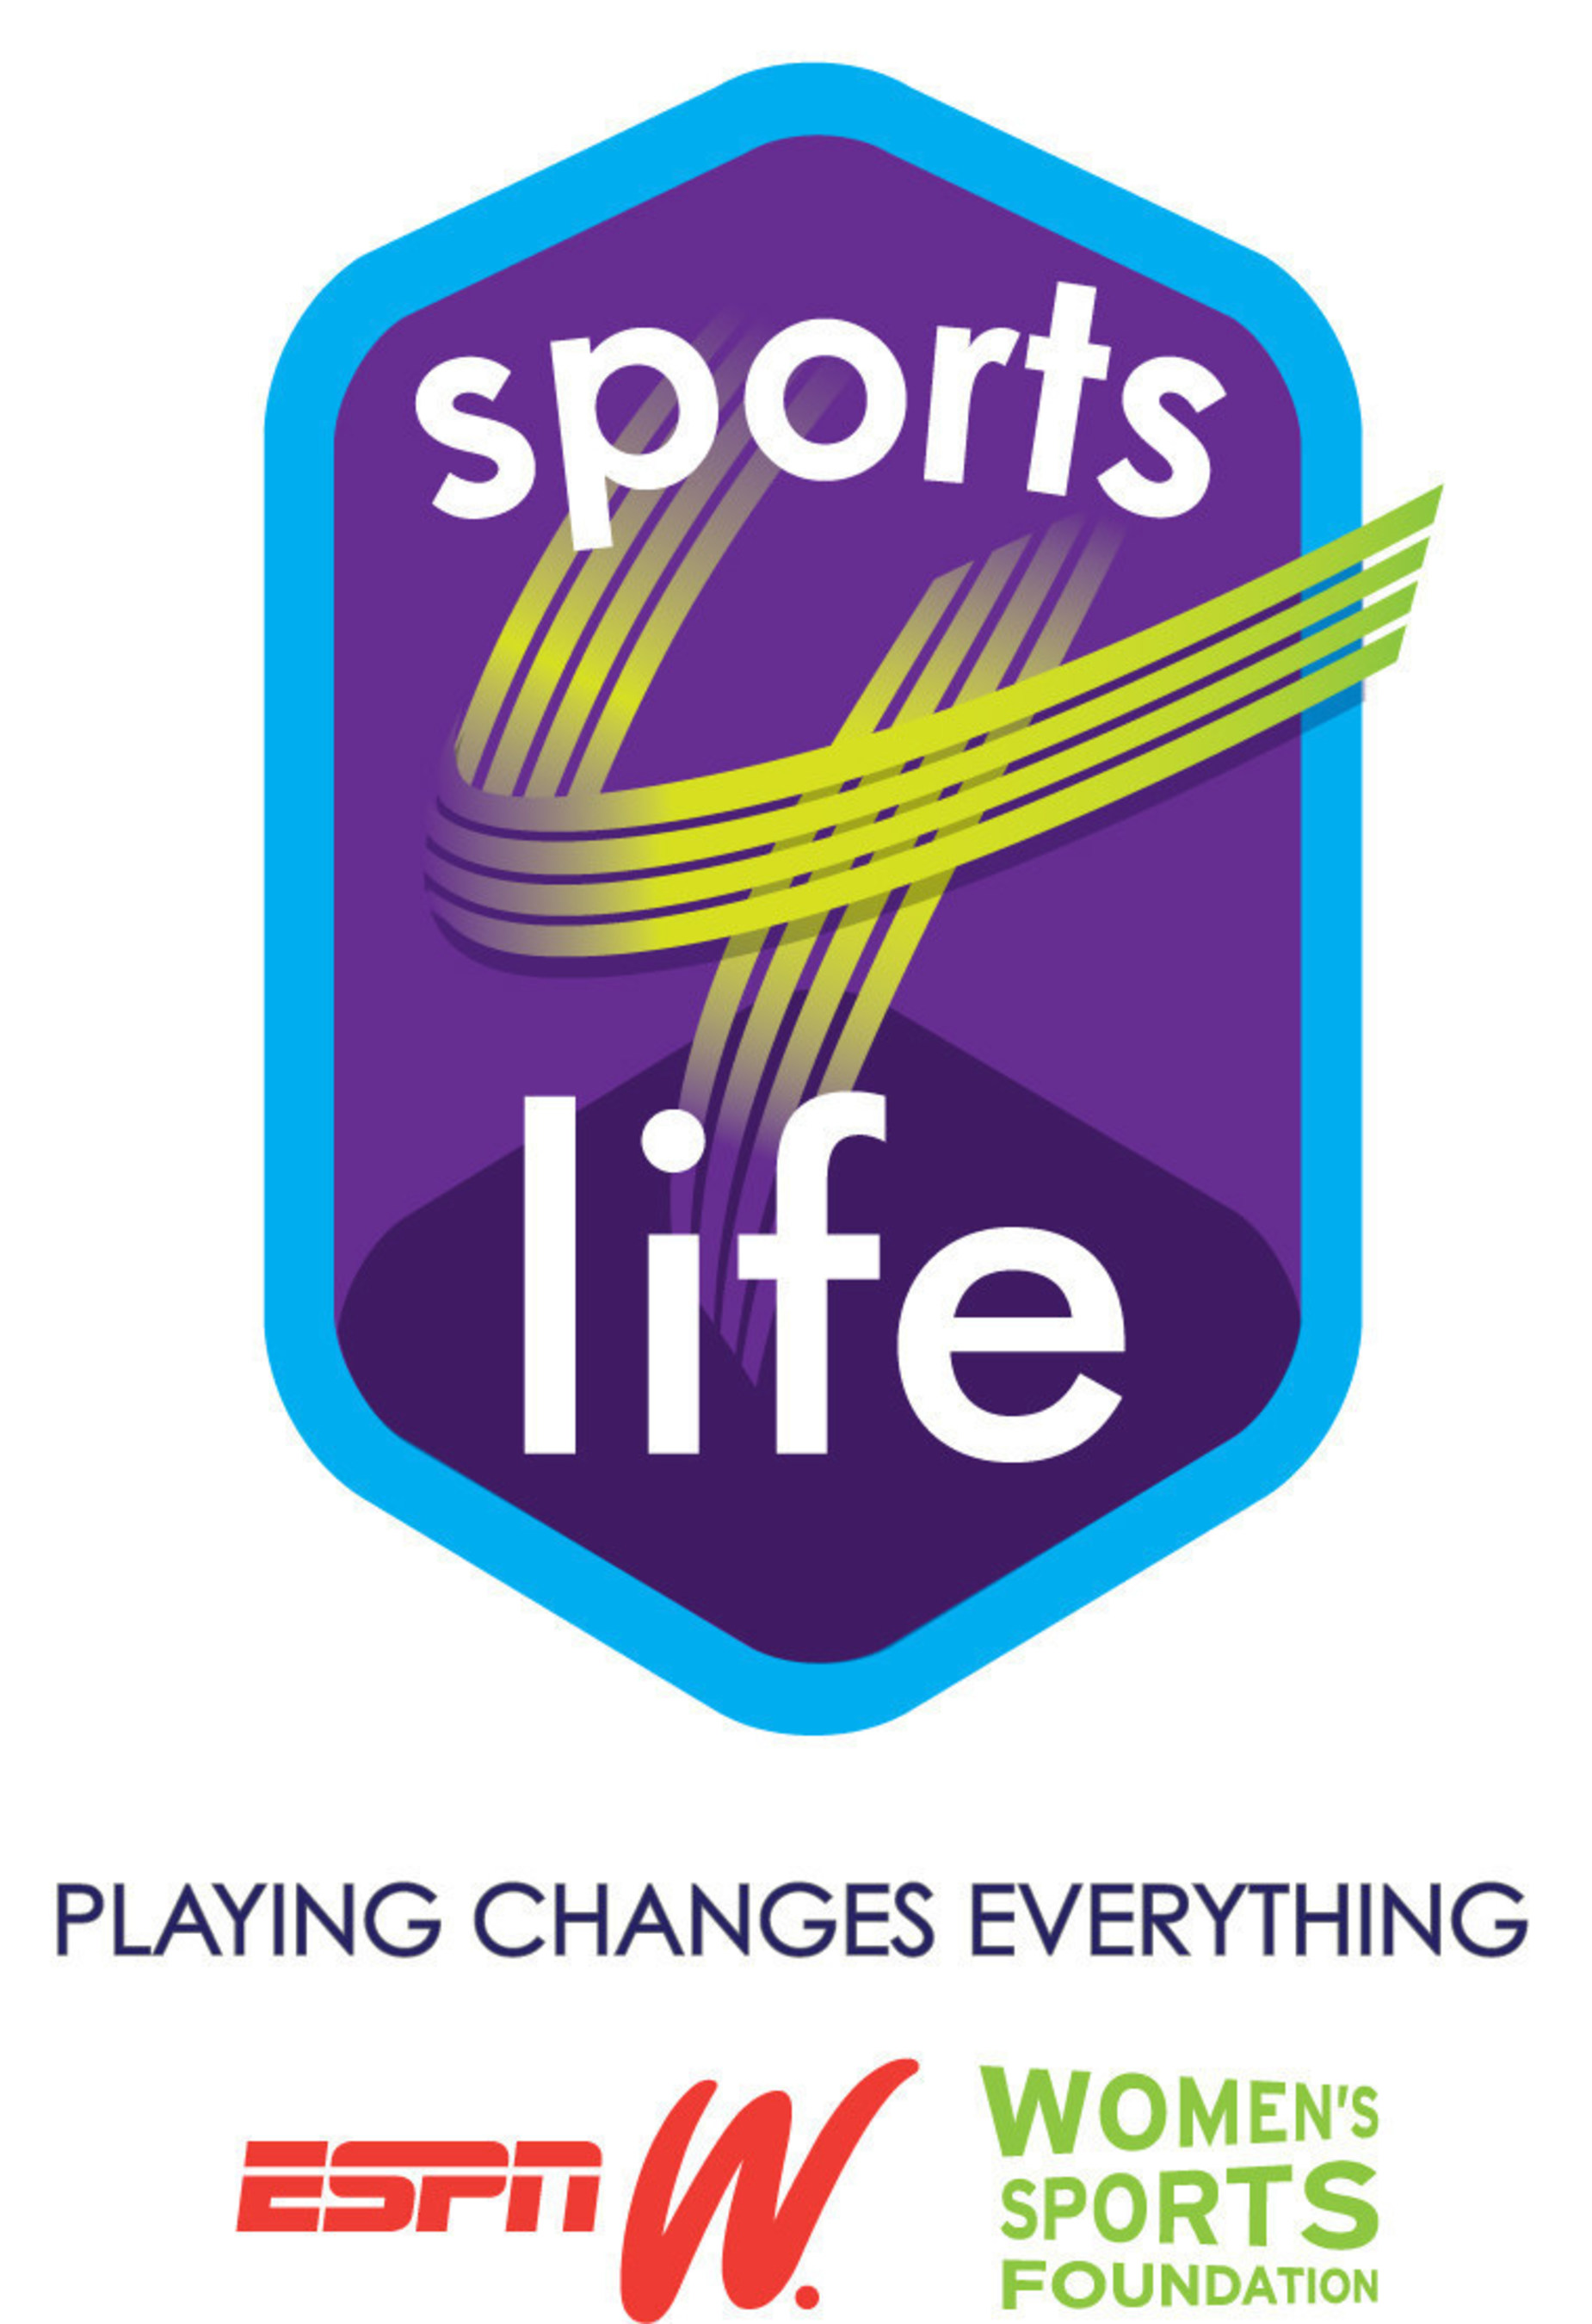 The Women's Sports Foundation and espnW Announce 2015 "Sports 4 Life" Grant Recipients.